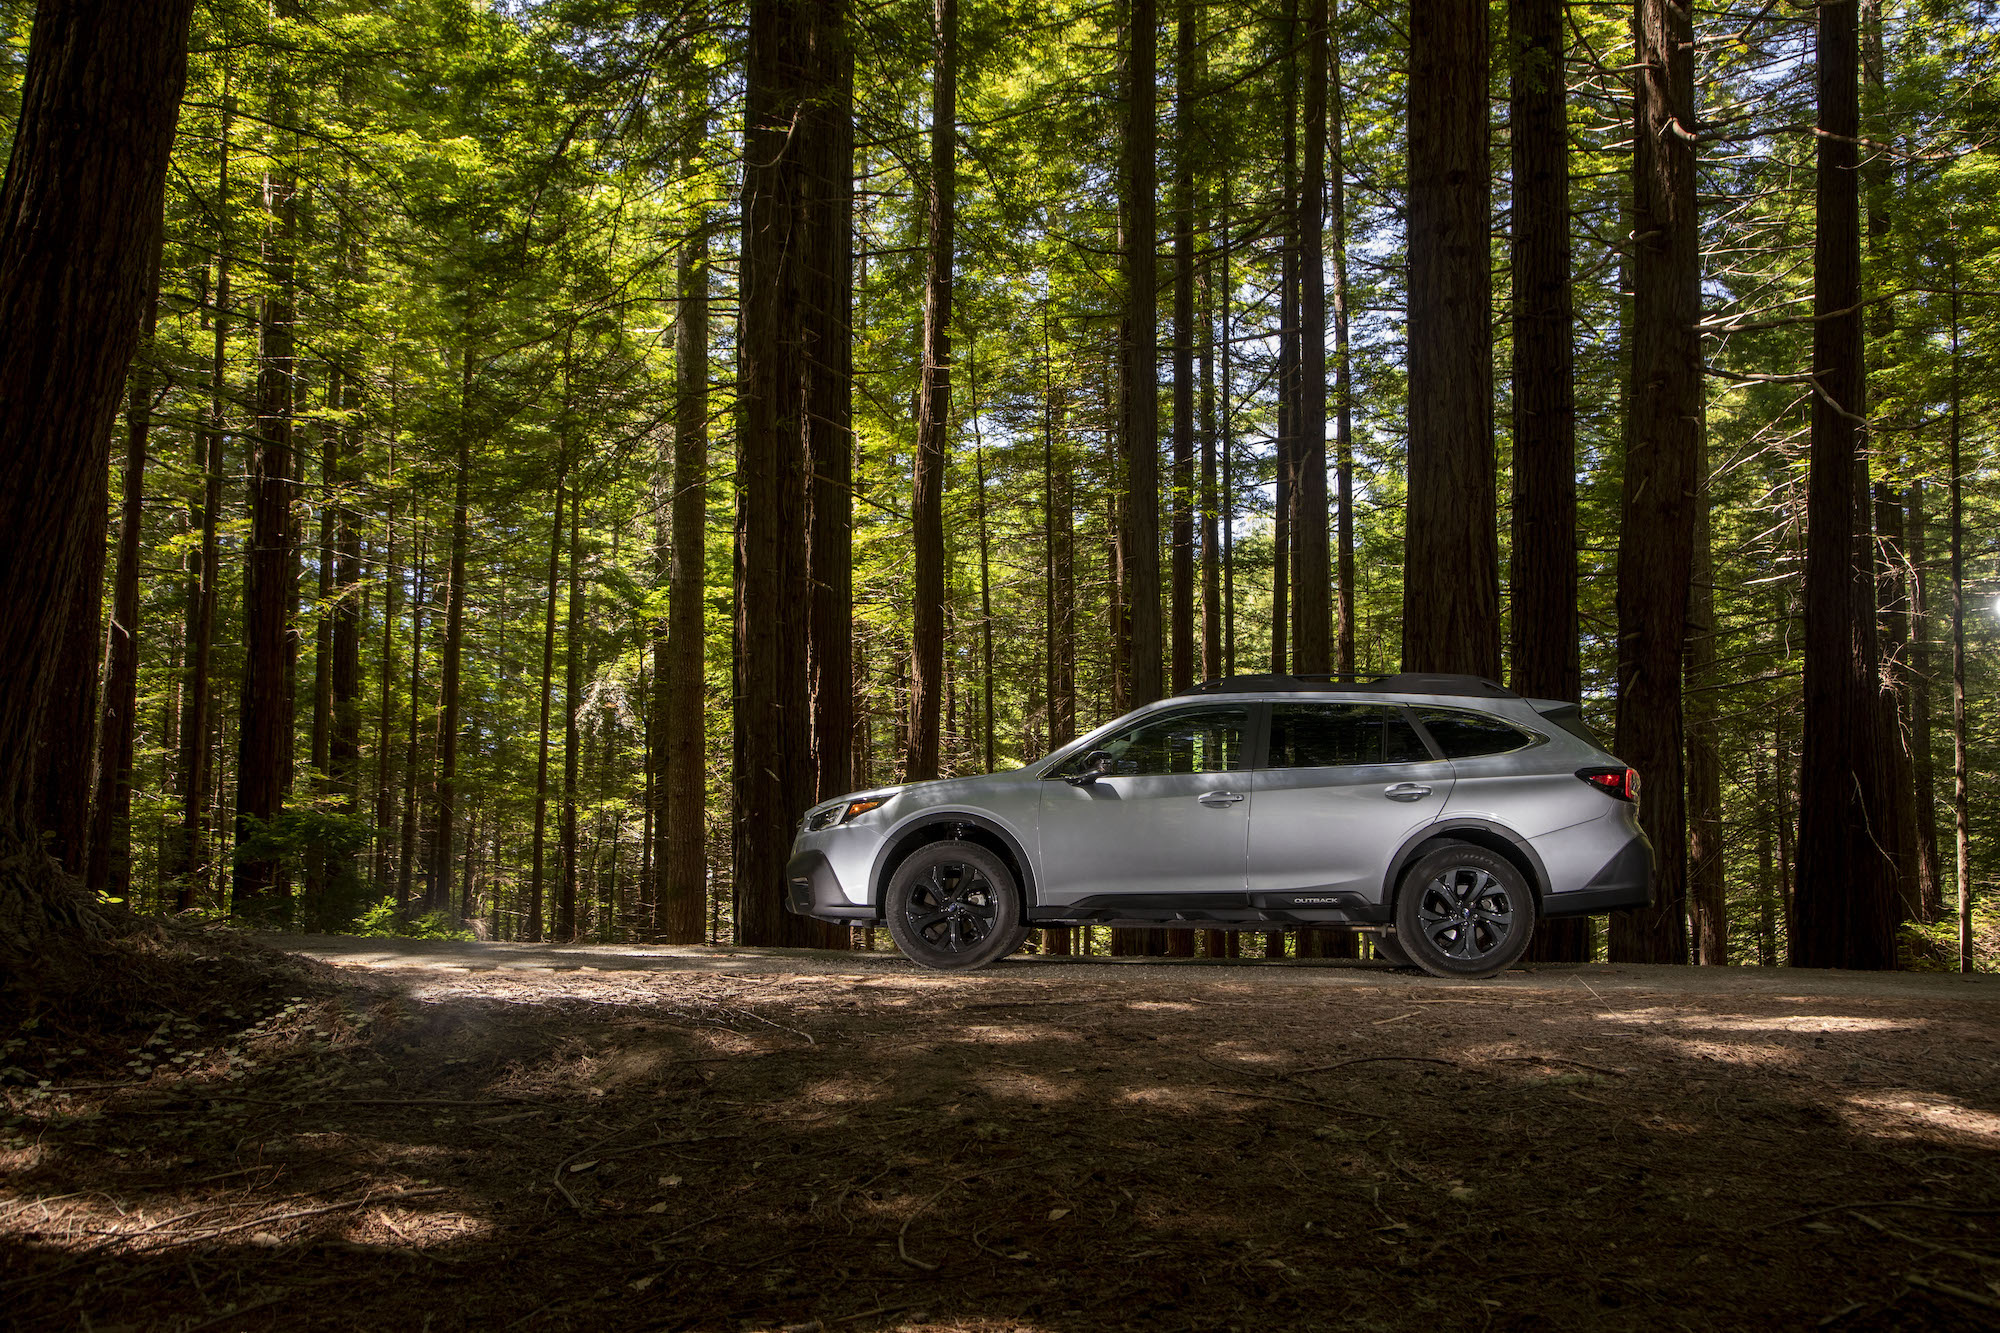 A side view of a silver 2020 Subaru Outback midsize SUV parked in a sun-dappled forest